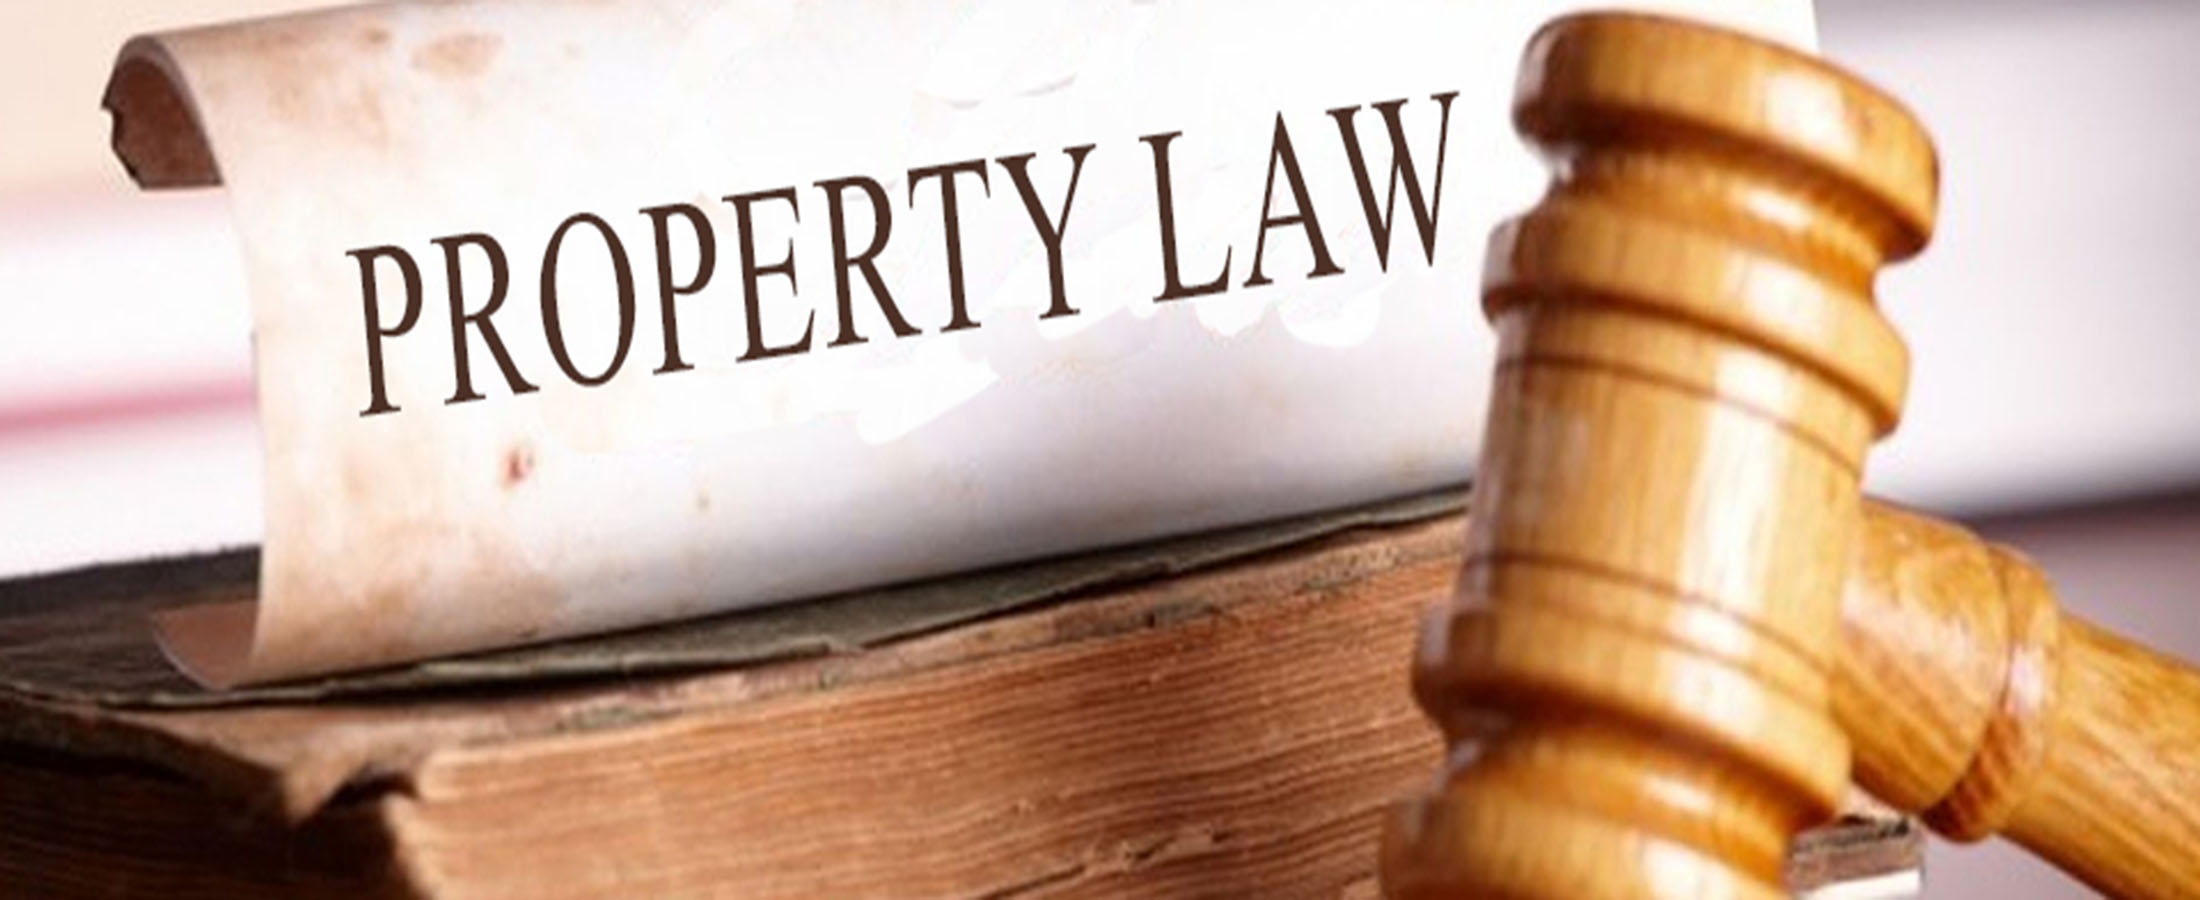 property law assignment definition